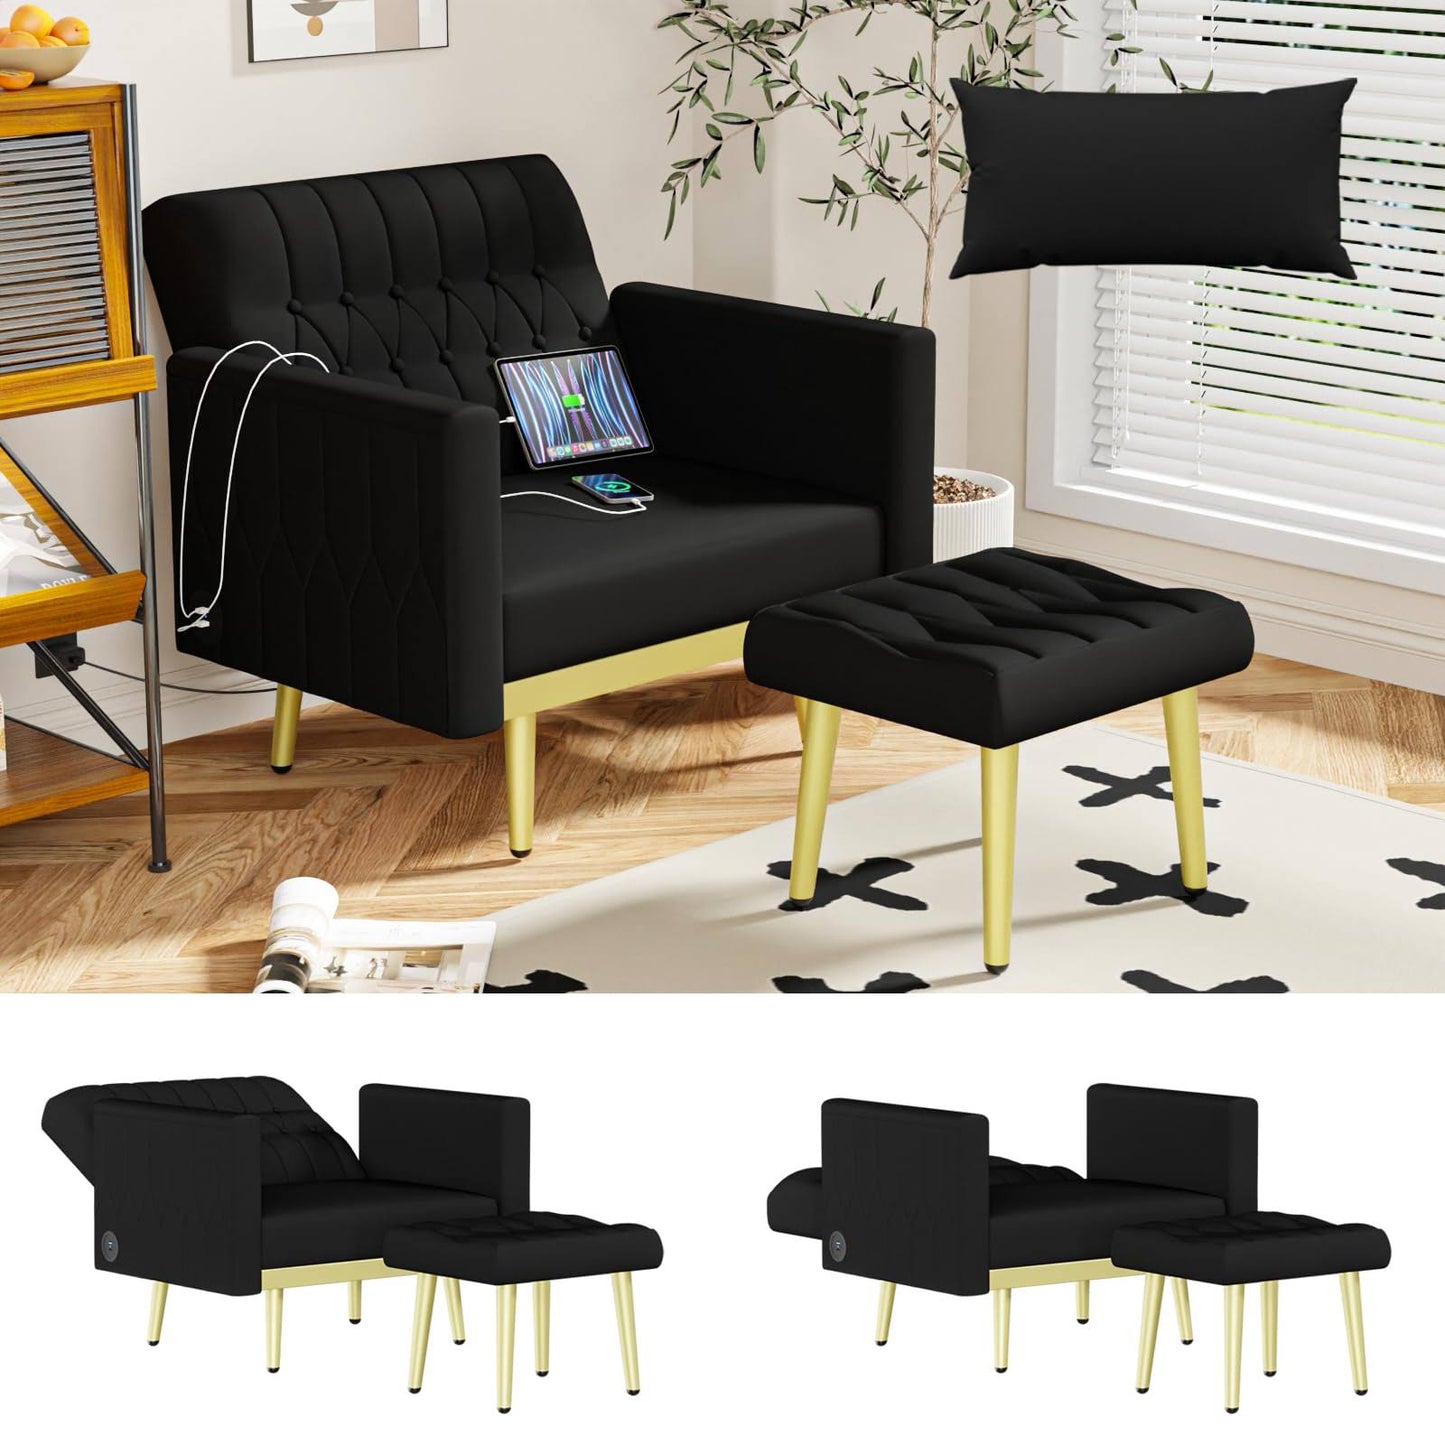 Velvet Modern Accent Chair And Ottoman Set With 2 Usb Ports, Black Comfy Reading Chair Bedroom Living Room Chairs, Recliner Lounge Chair,